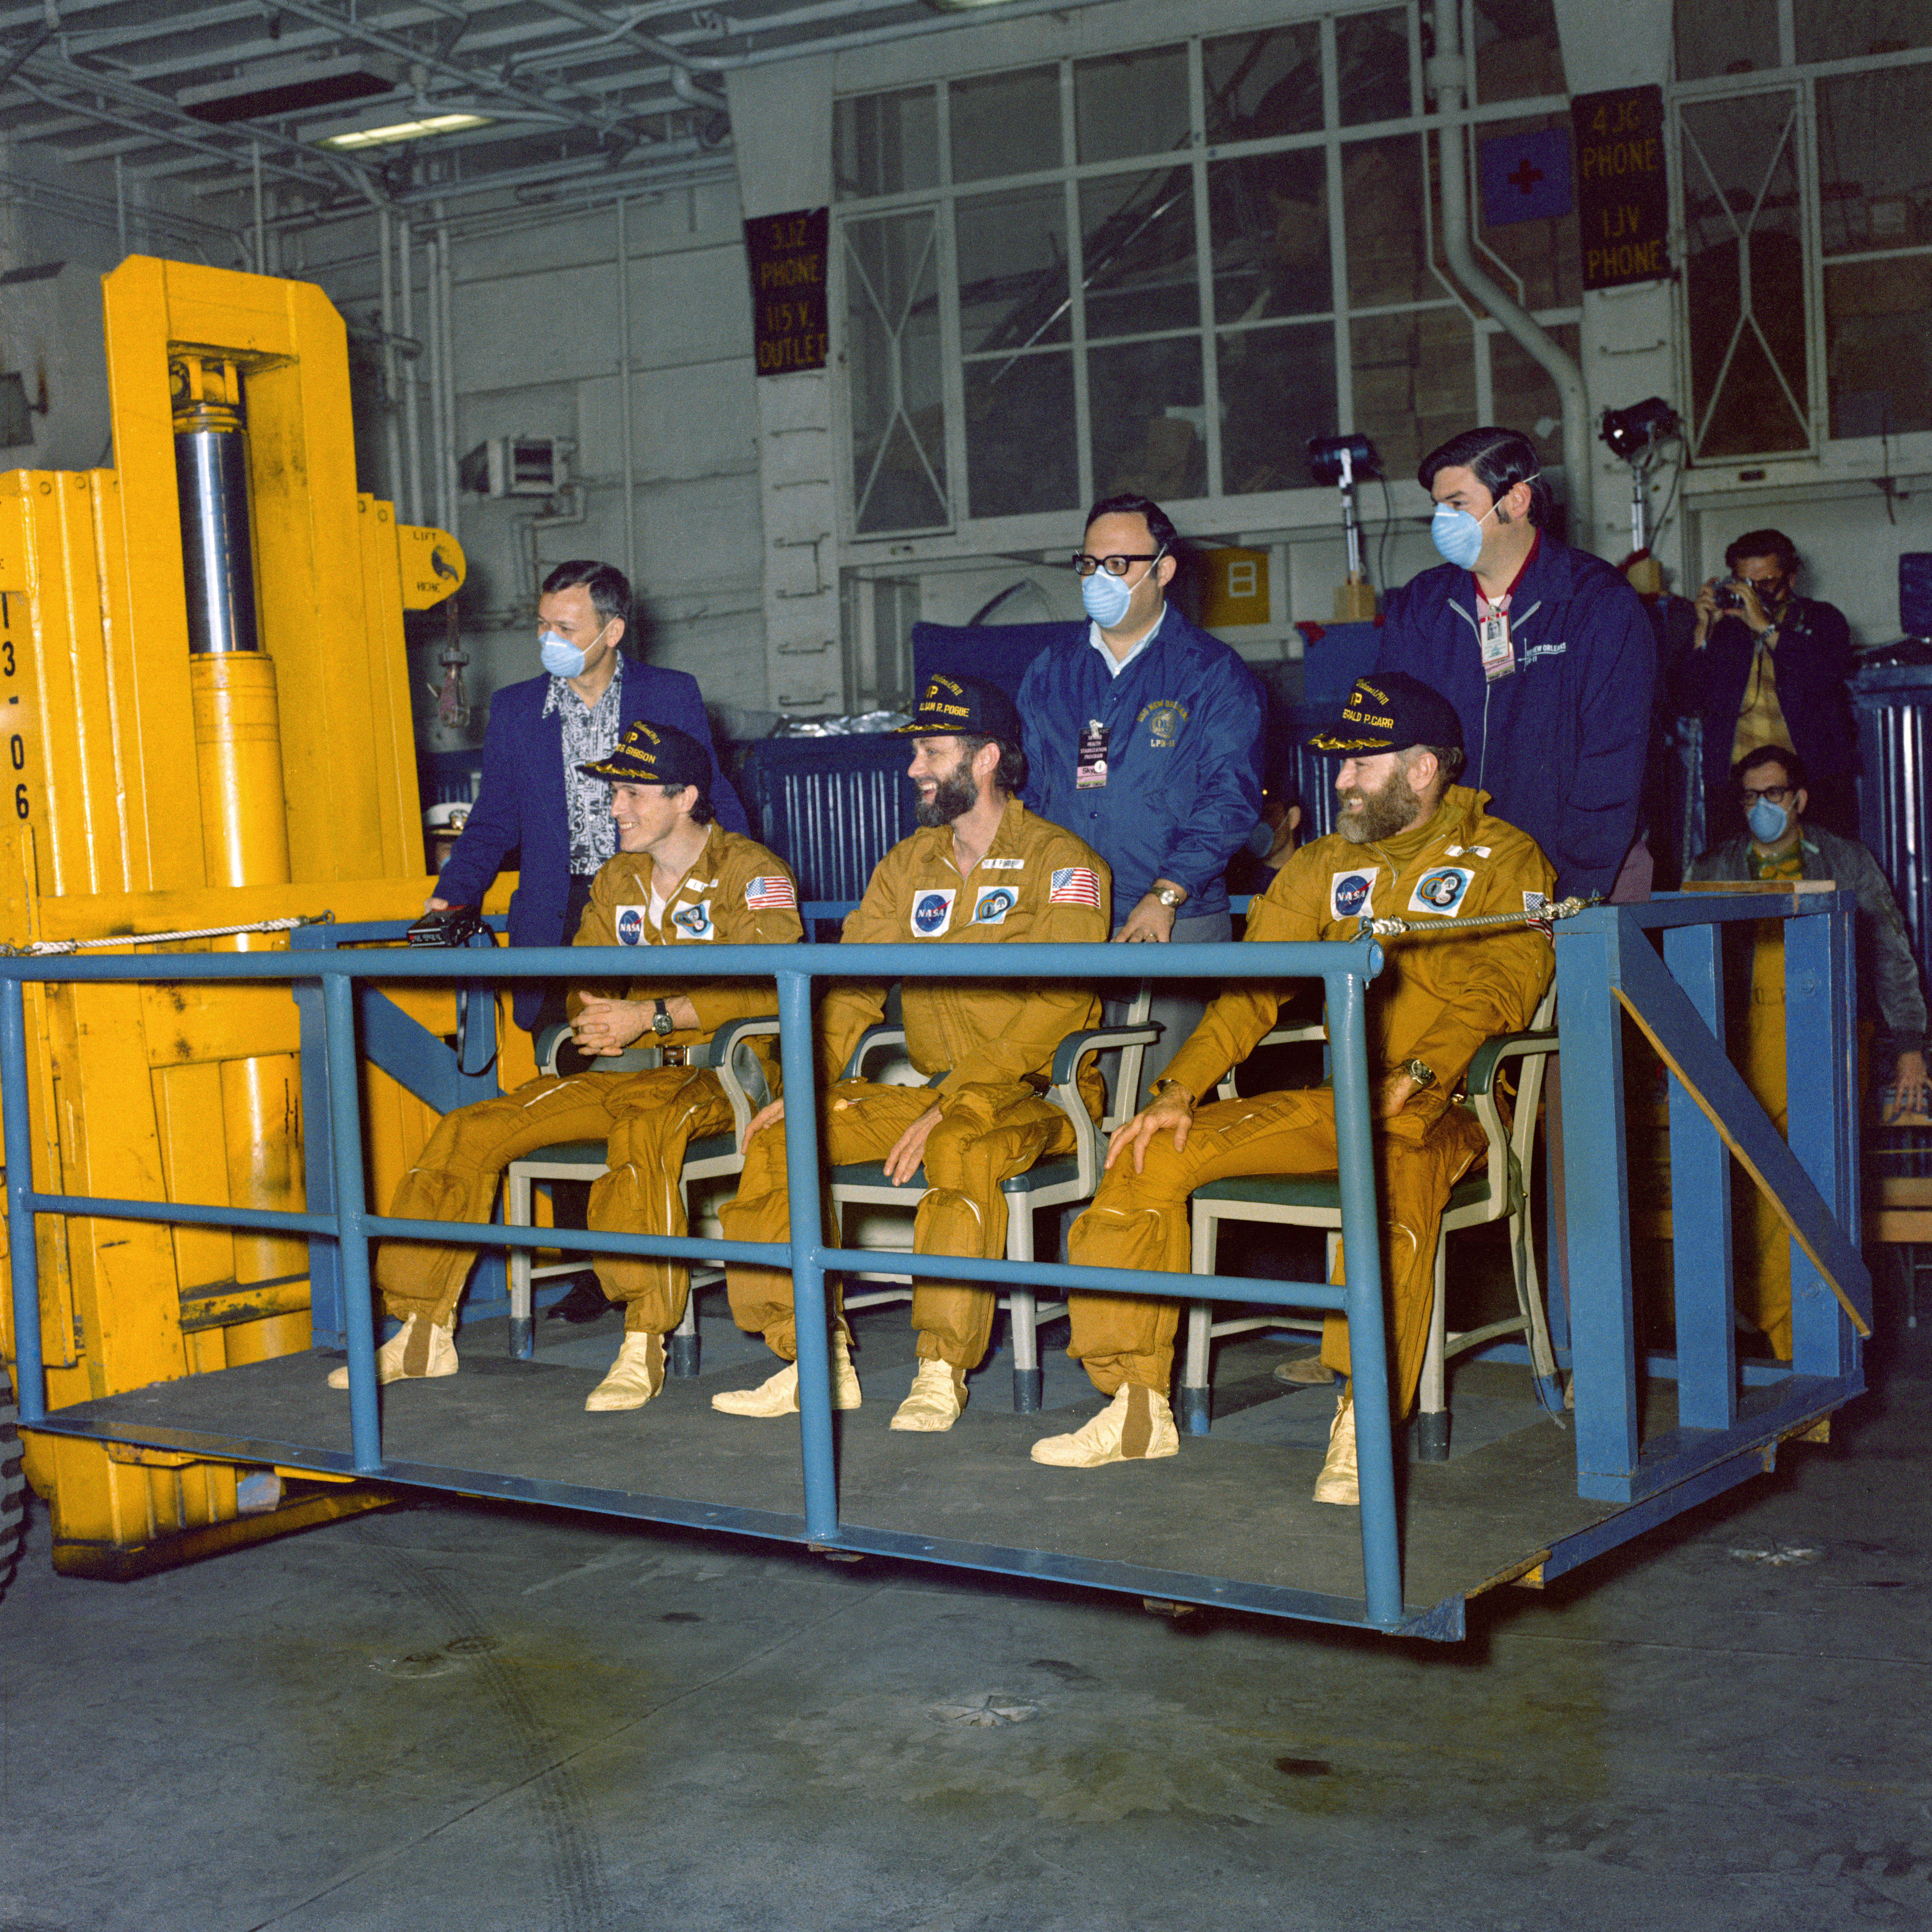 Skylab 4 crew members Gibson, left, Pogue, and Gerald P. Carr seated on a forklift platform after emerging from the CM and on their way to the medical facility